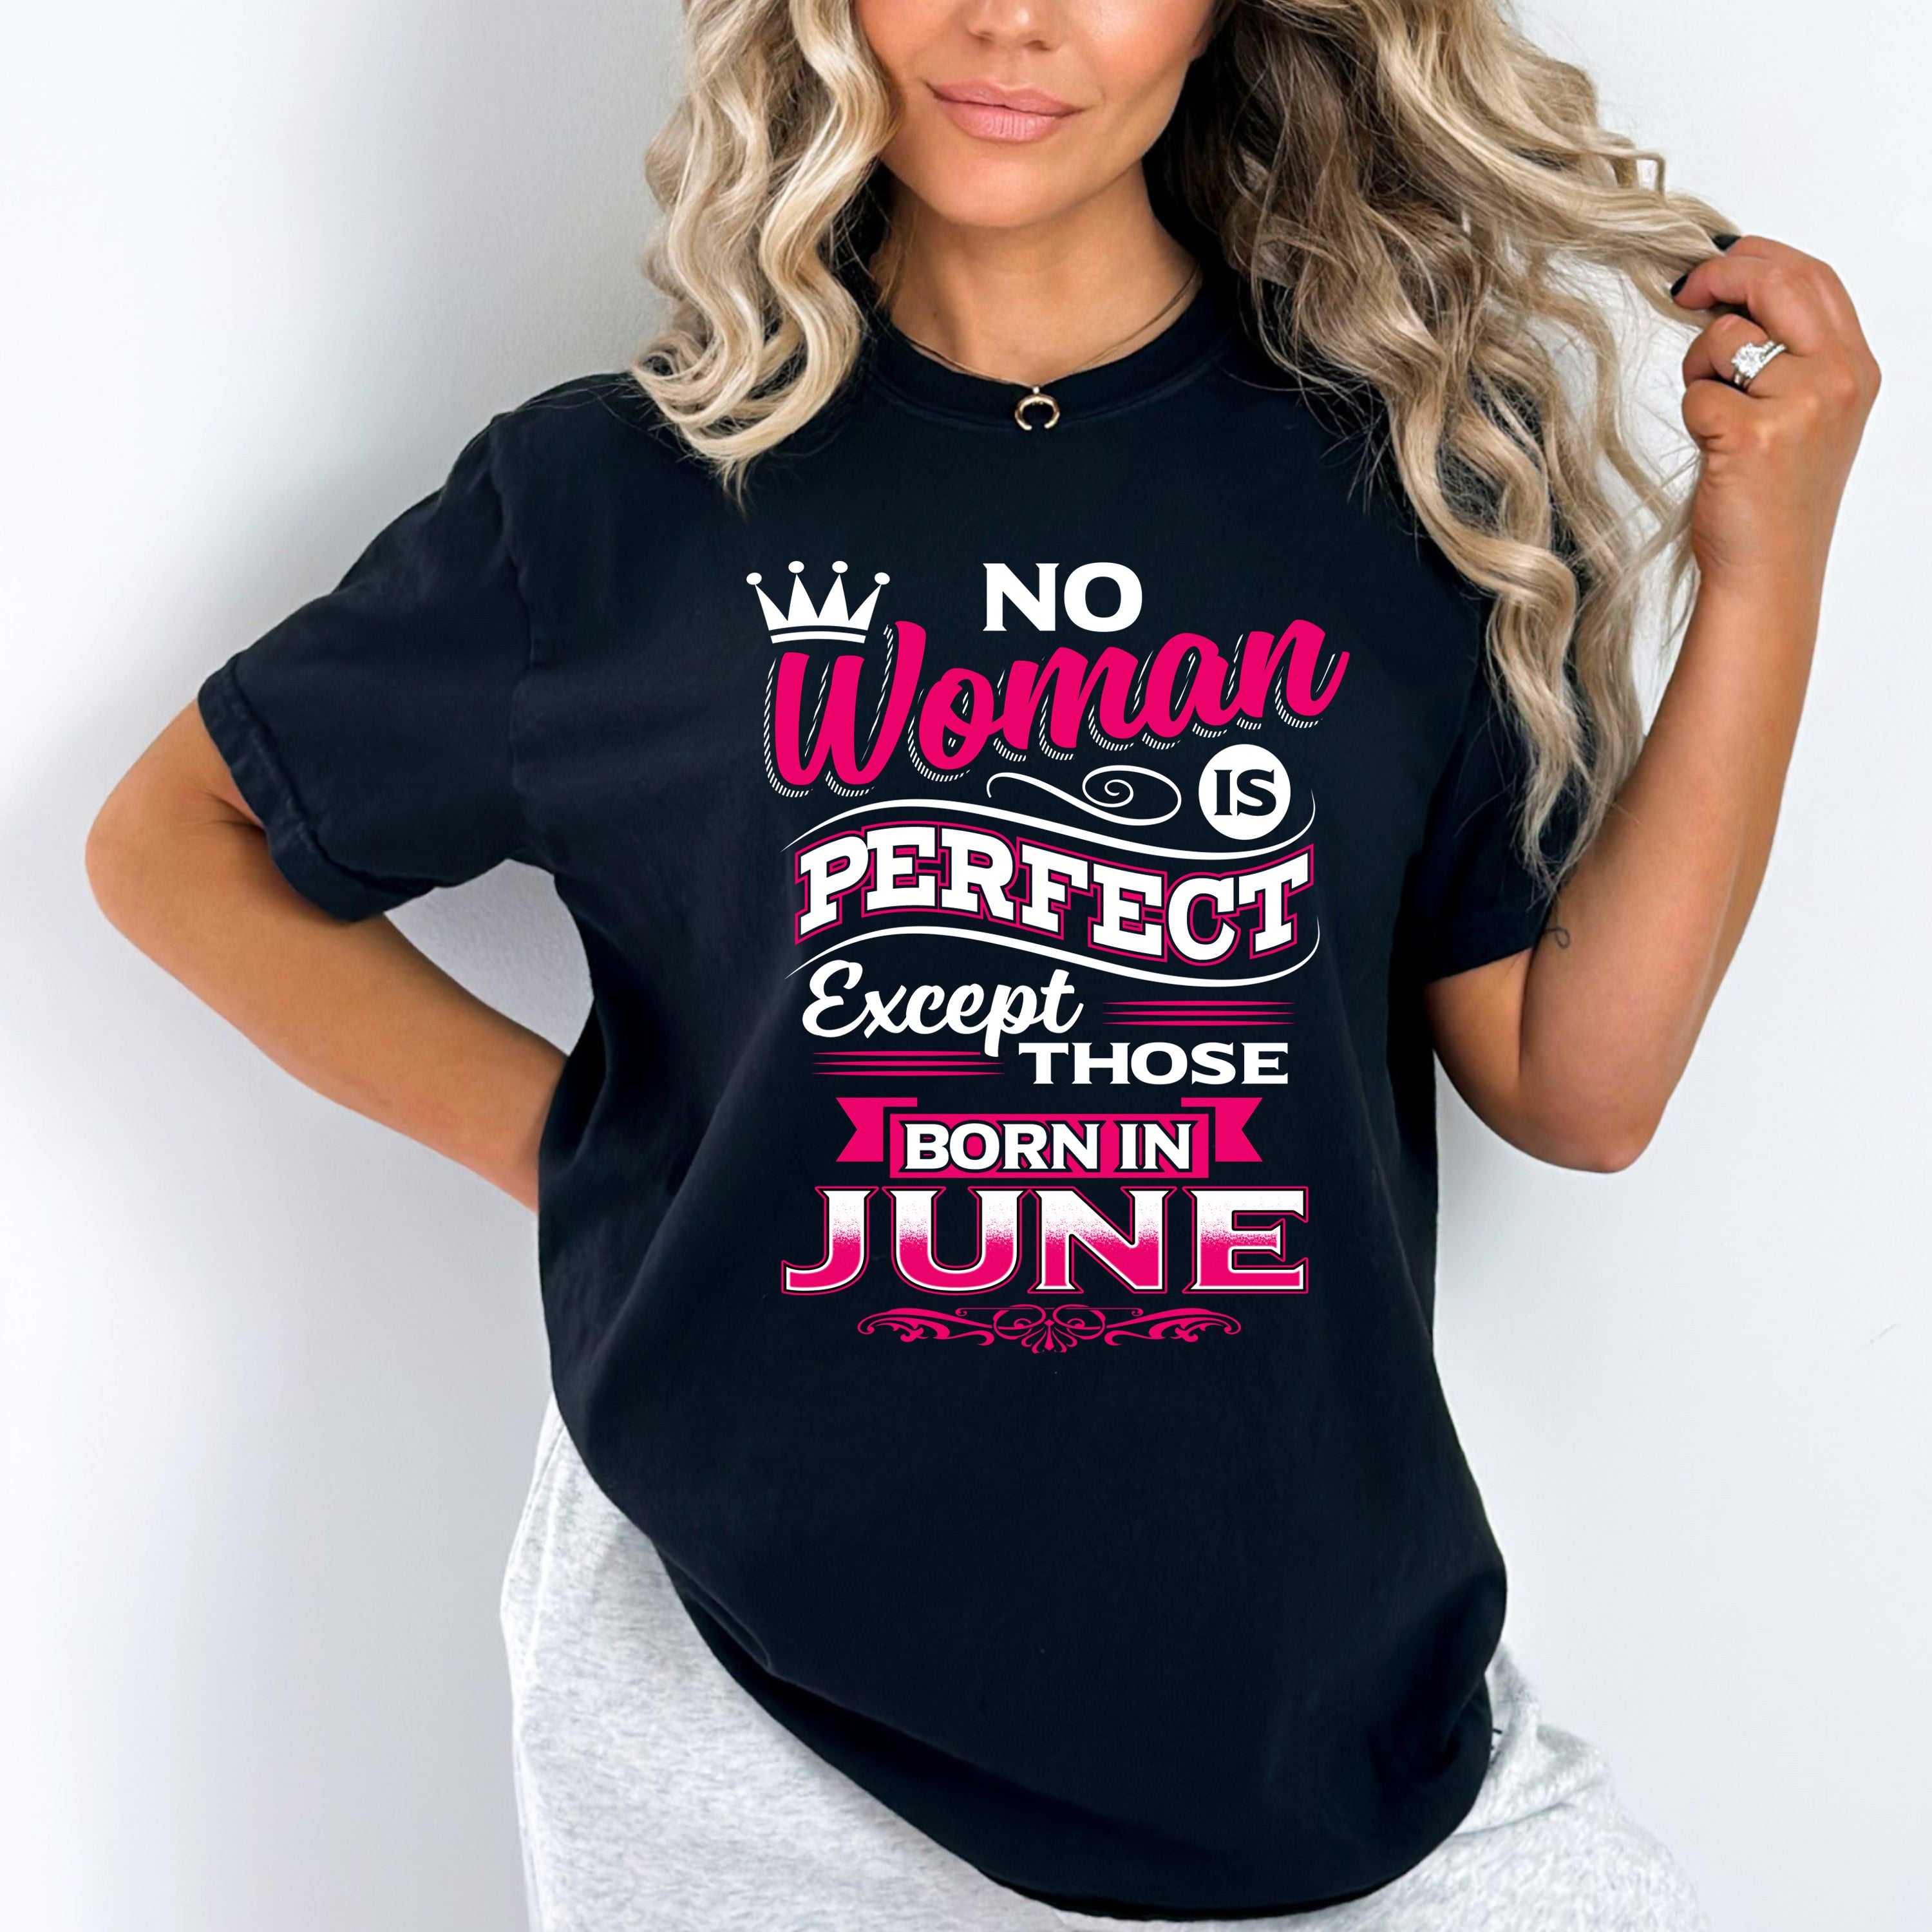 "No Woman Is Perfect Except Those Born In June"